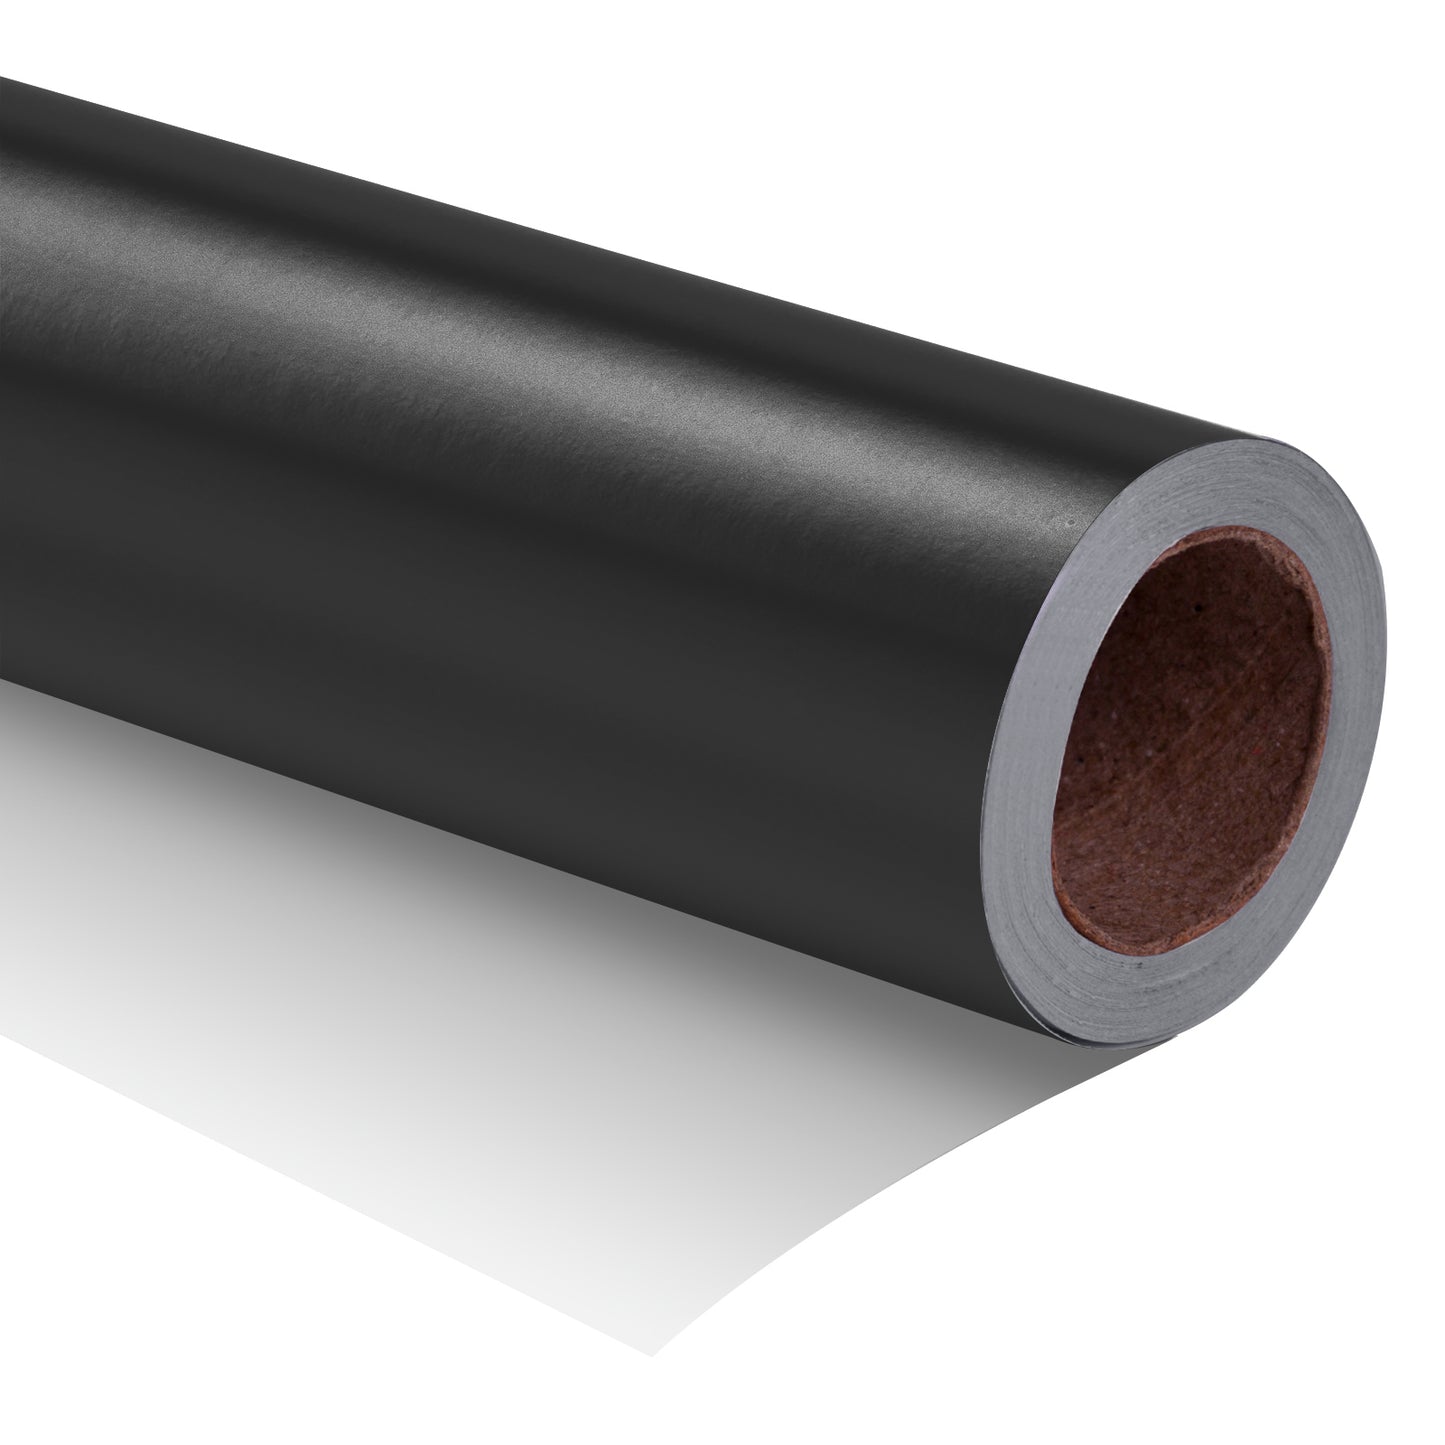 Matte Metallic Wrapping Paper Roll Black Ream Wholesale Wrapaholic